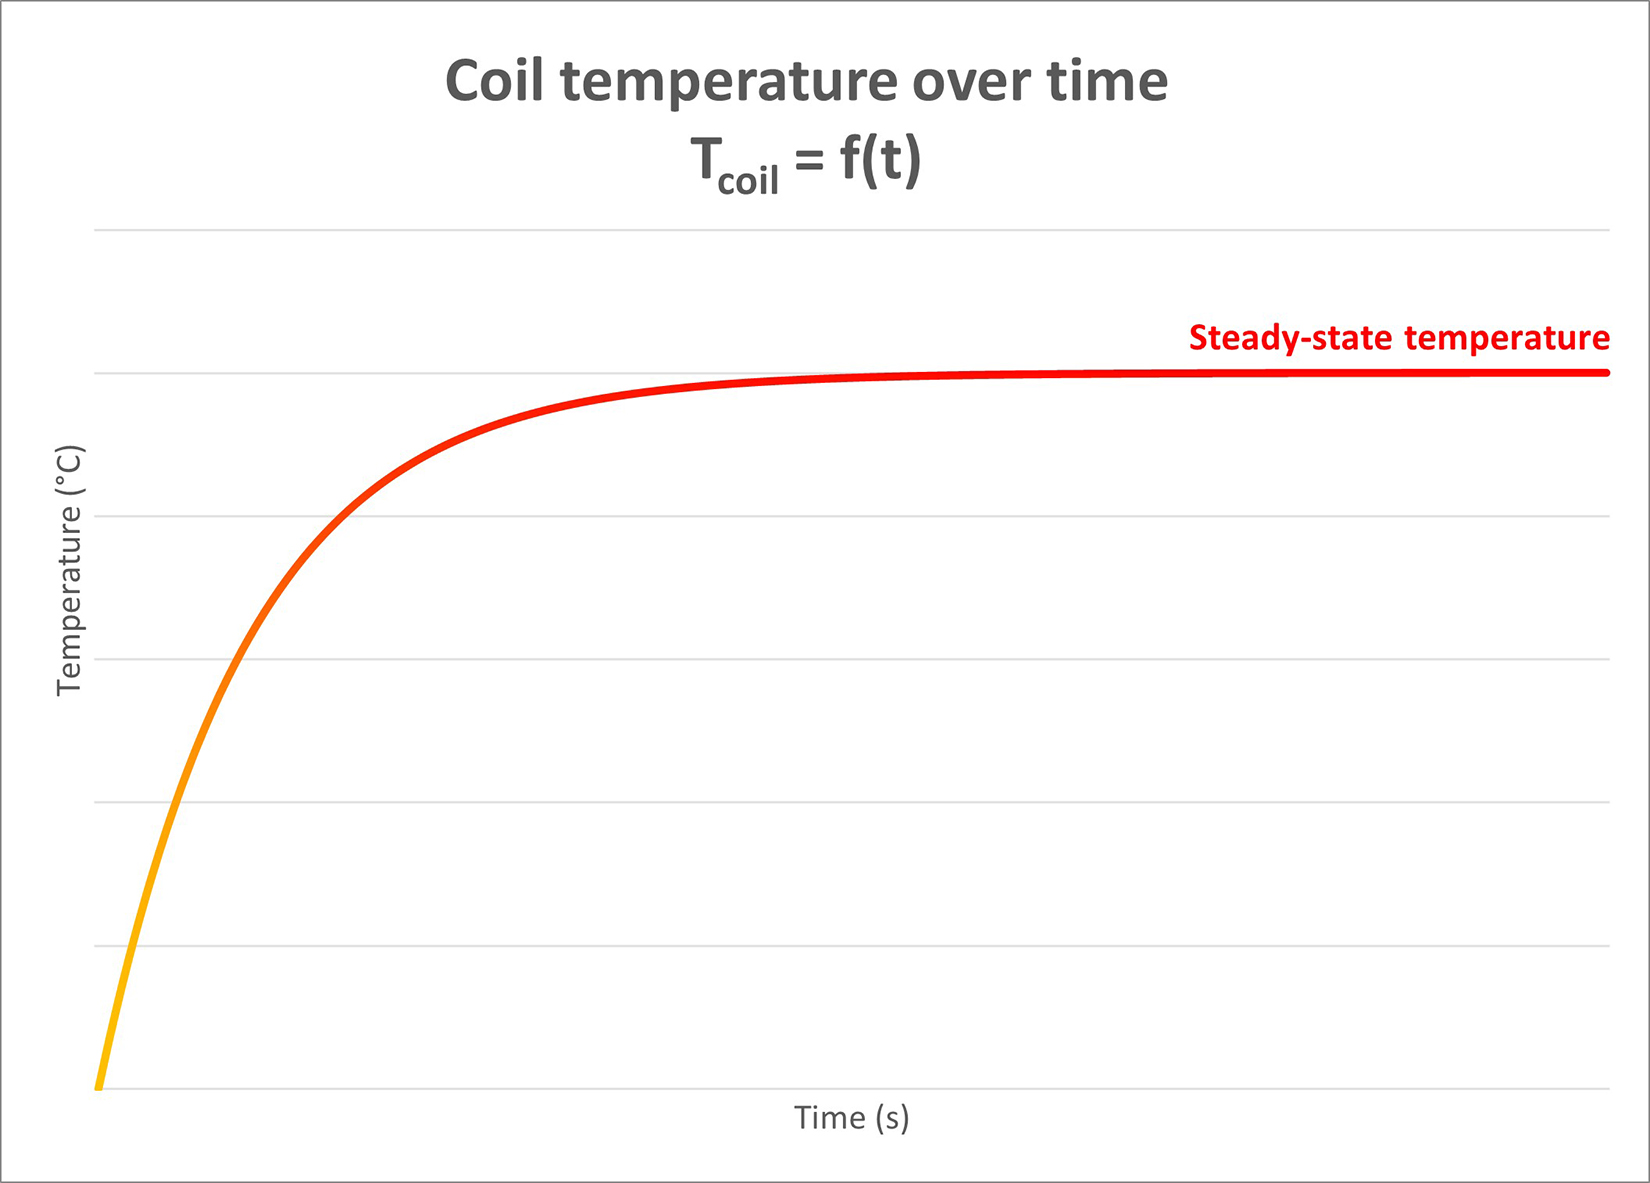 Coil temperature stabilizes at a given temperature when the current is constant over time.